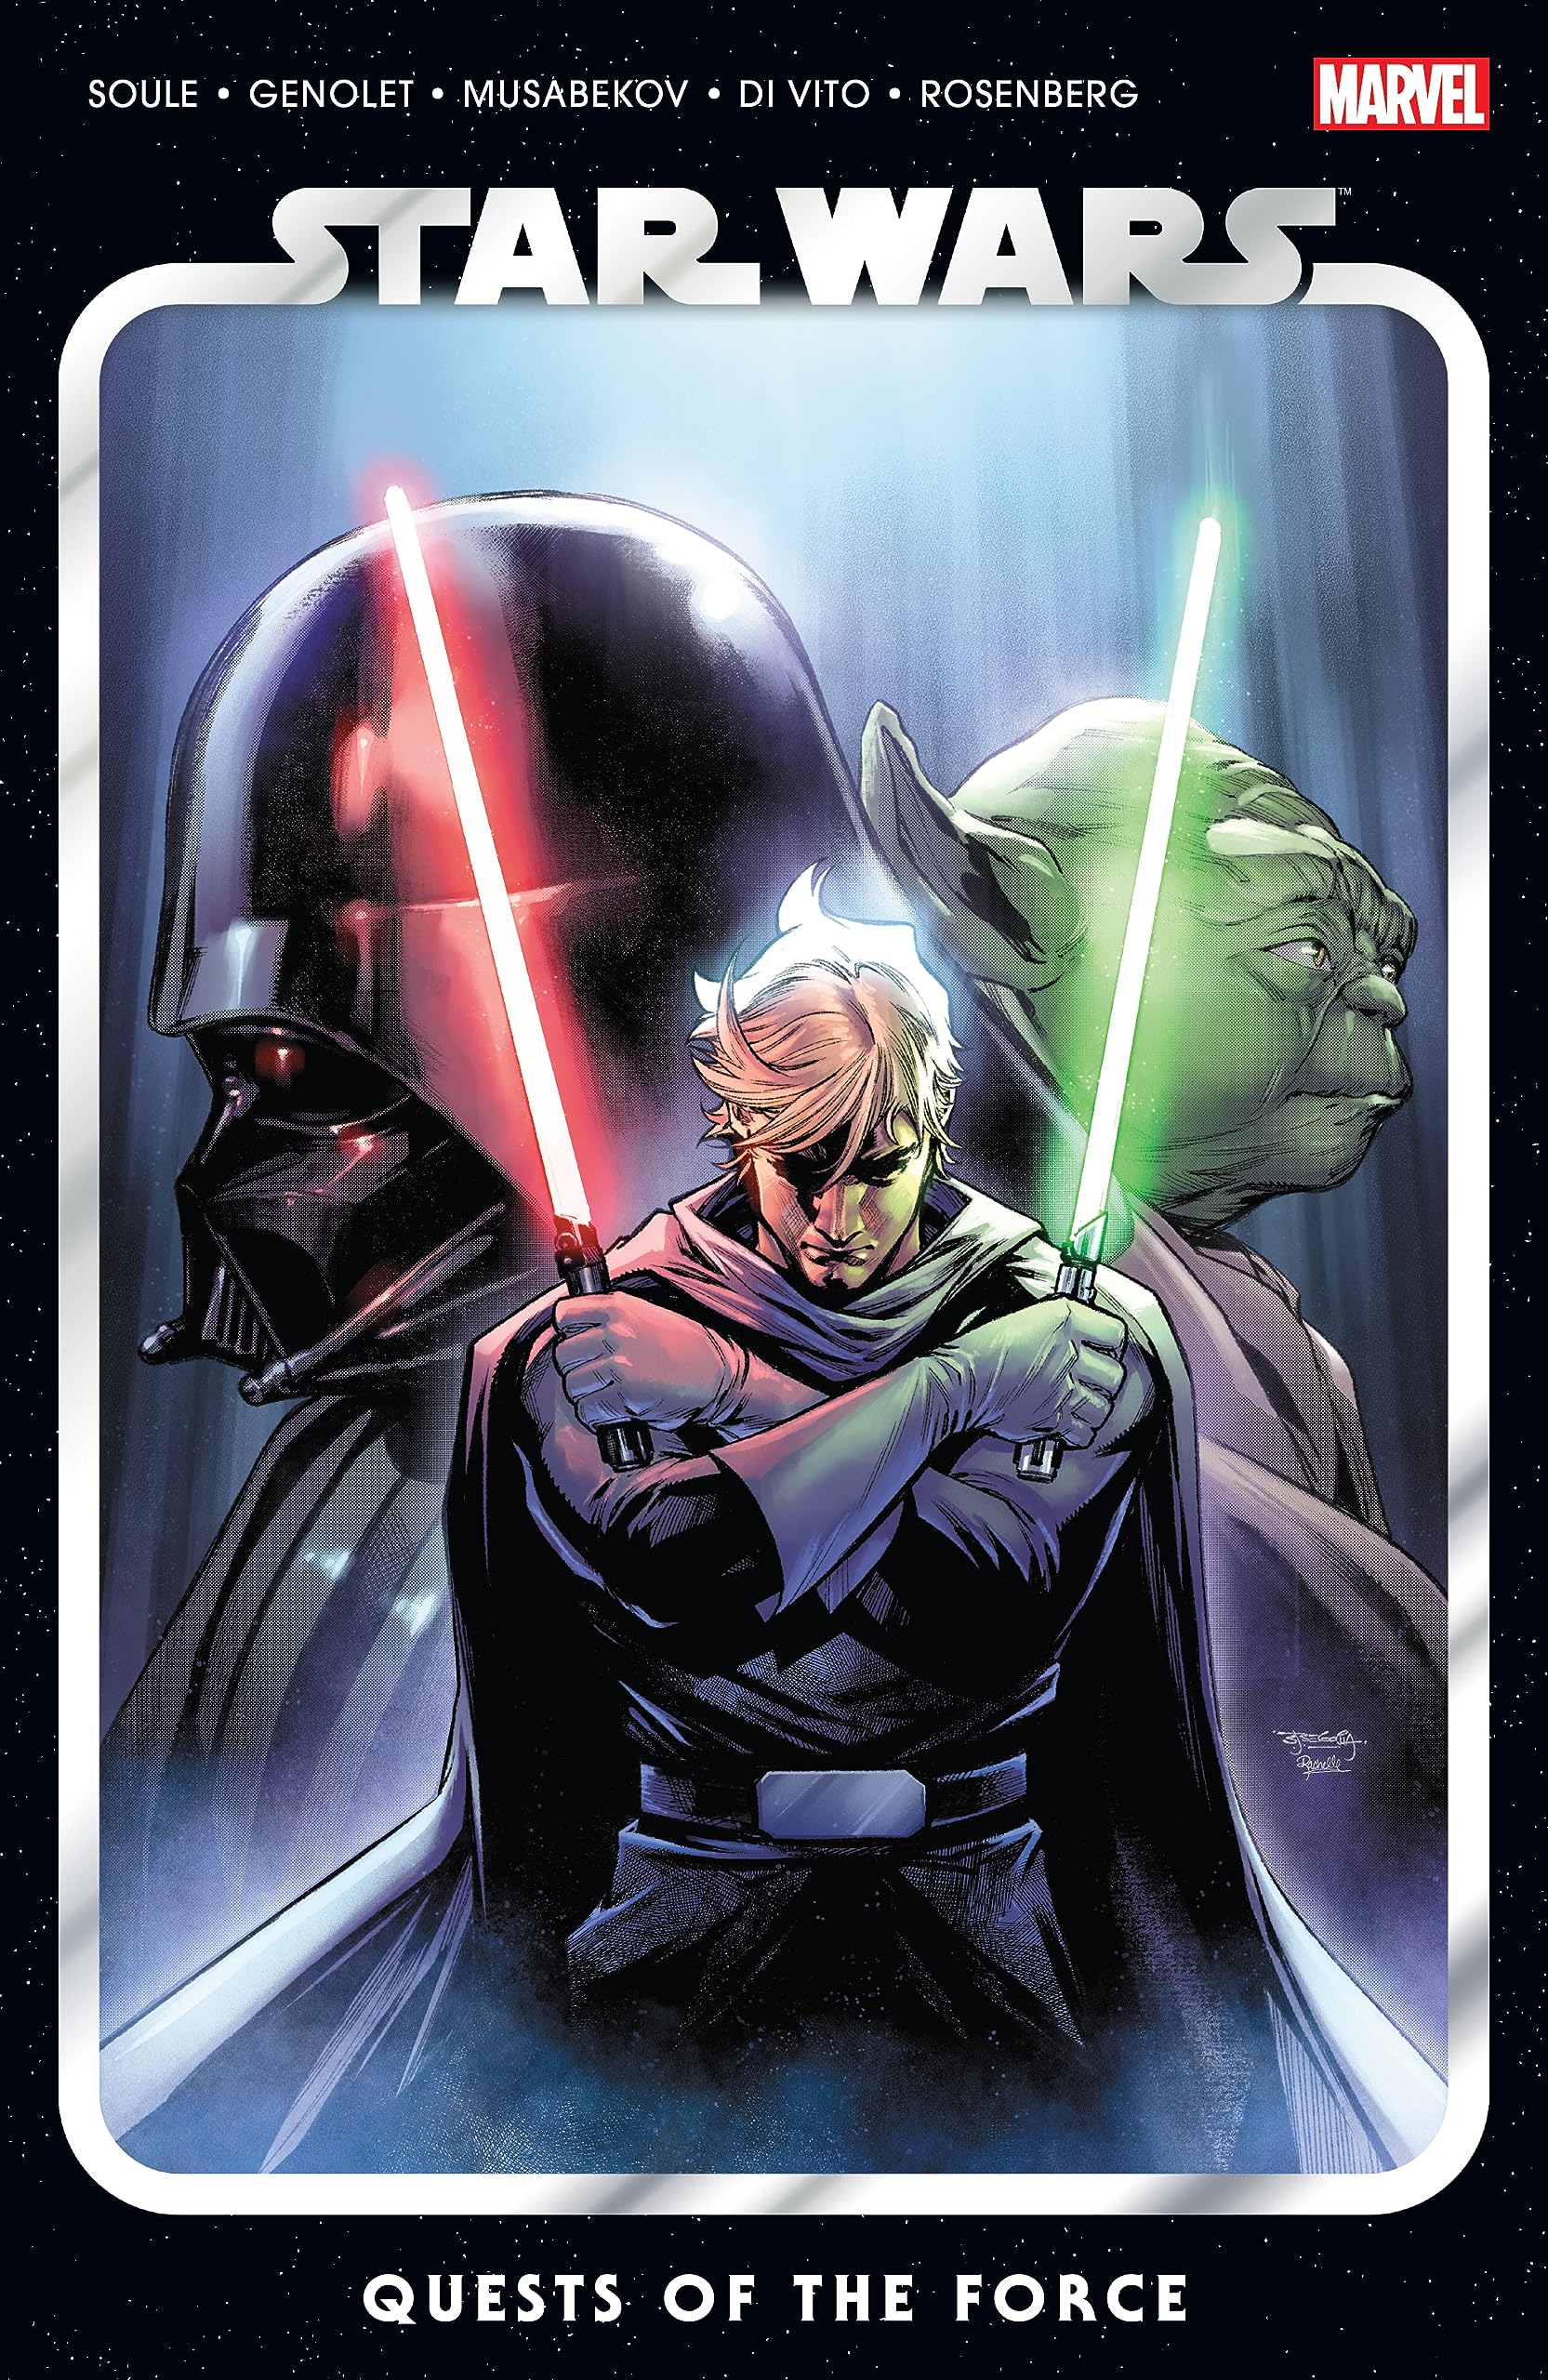 Plik:StarWars-Vol-6-Quests-of-the-Force-Final-Cover.jpg